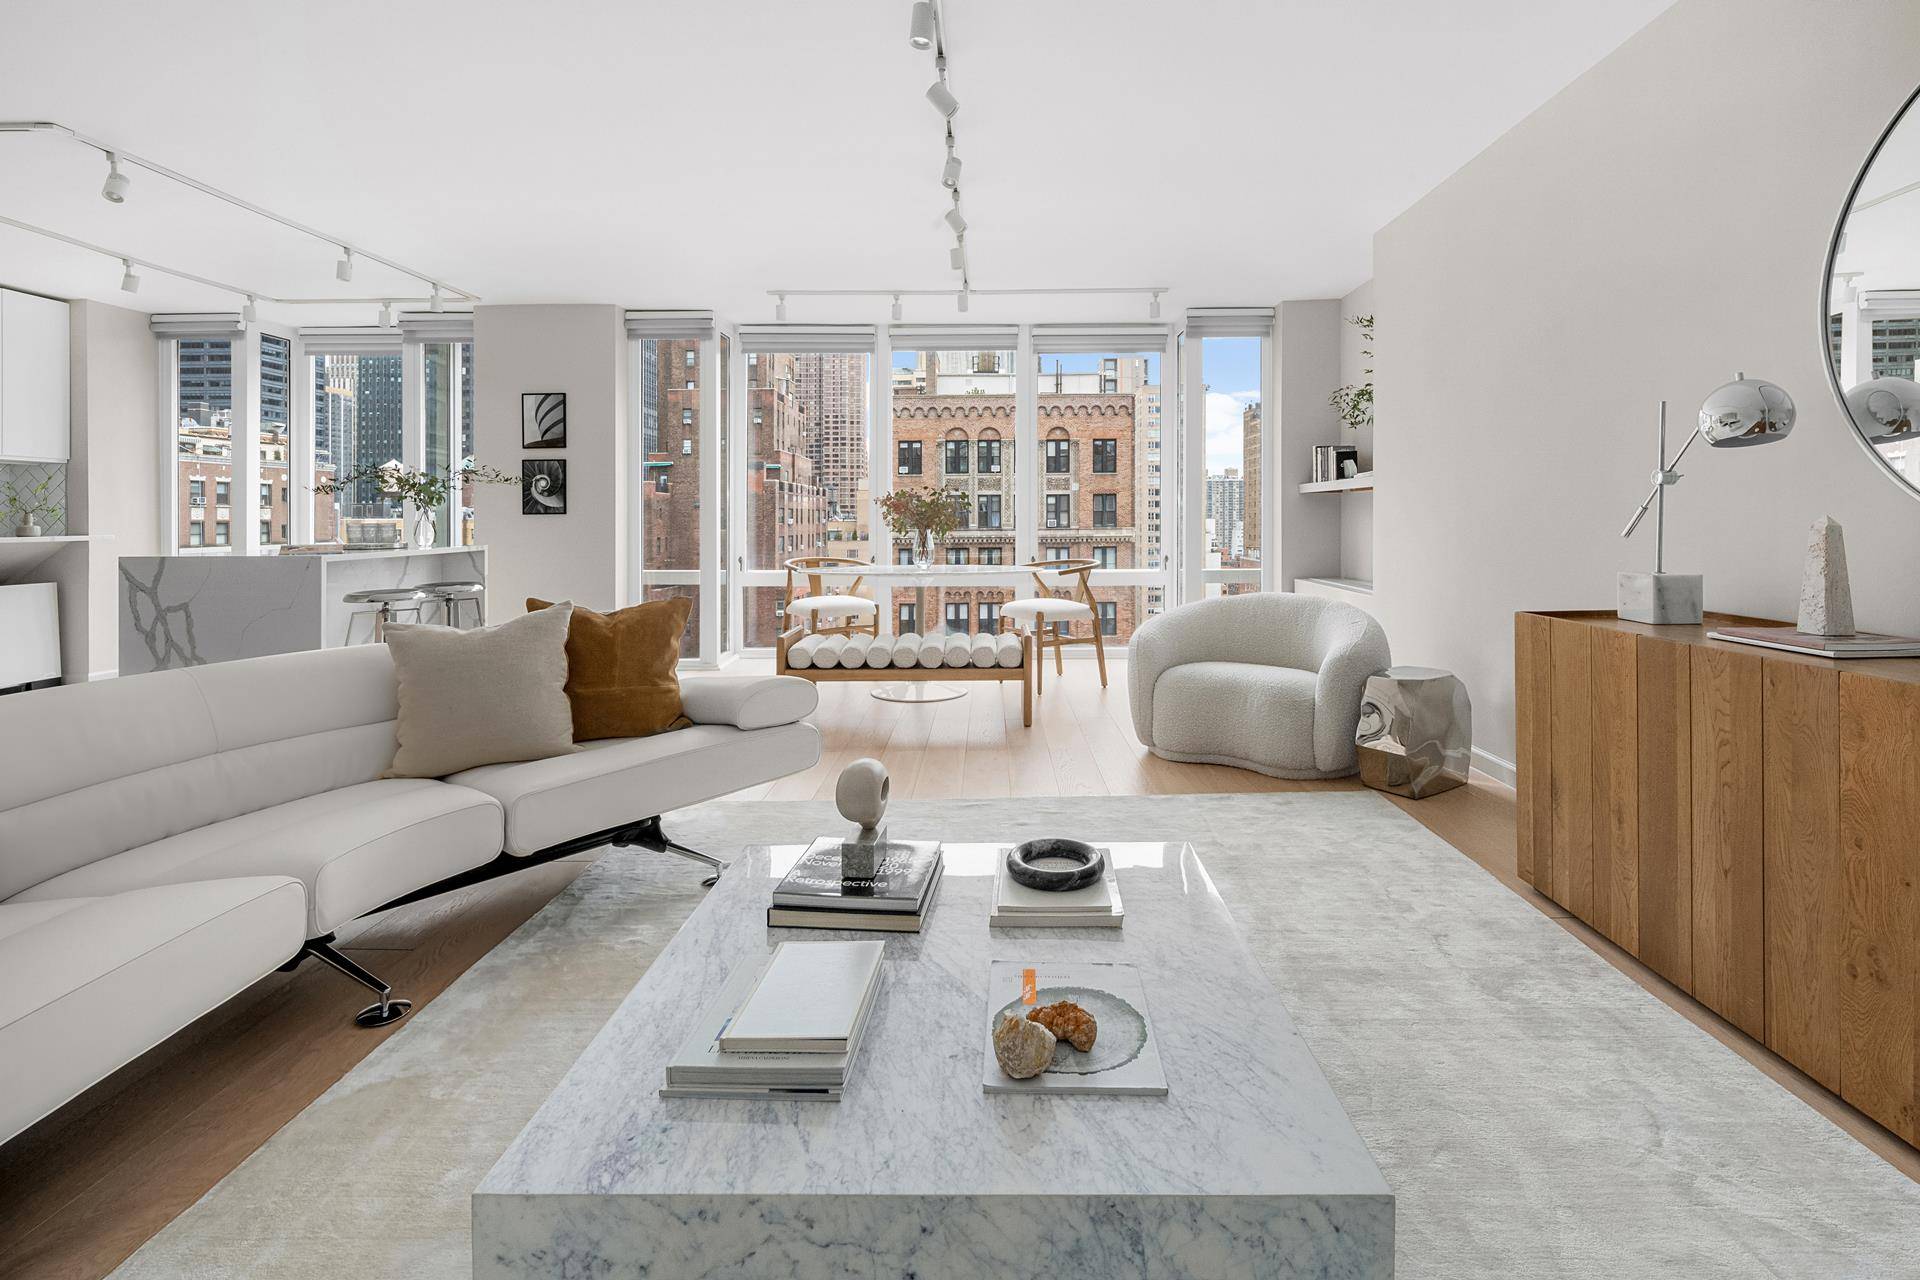 Introducing Residence 13 at 52 Park Avenue One of the most special apartments on Park Avenue !